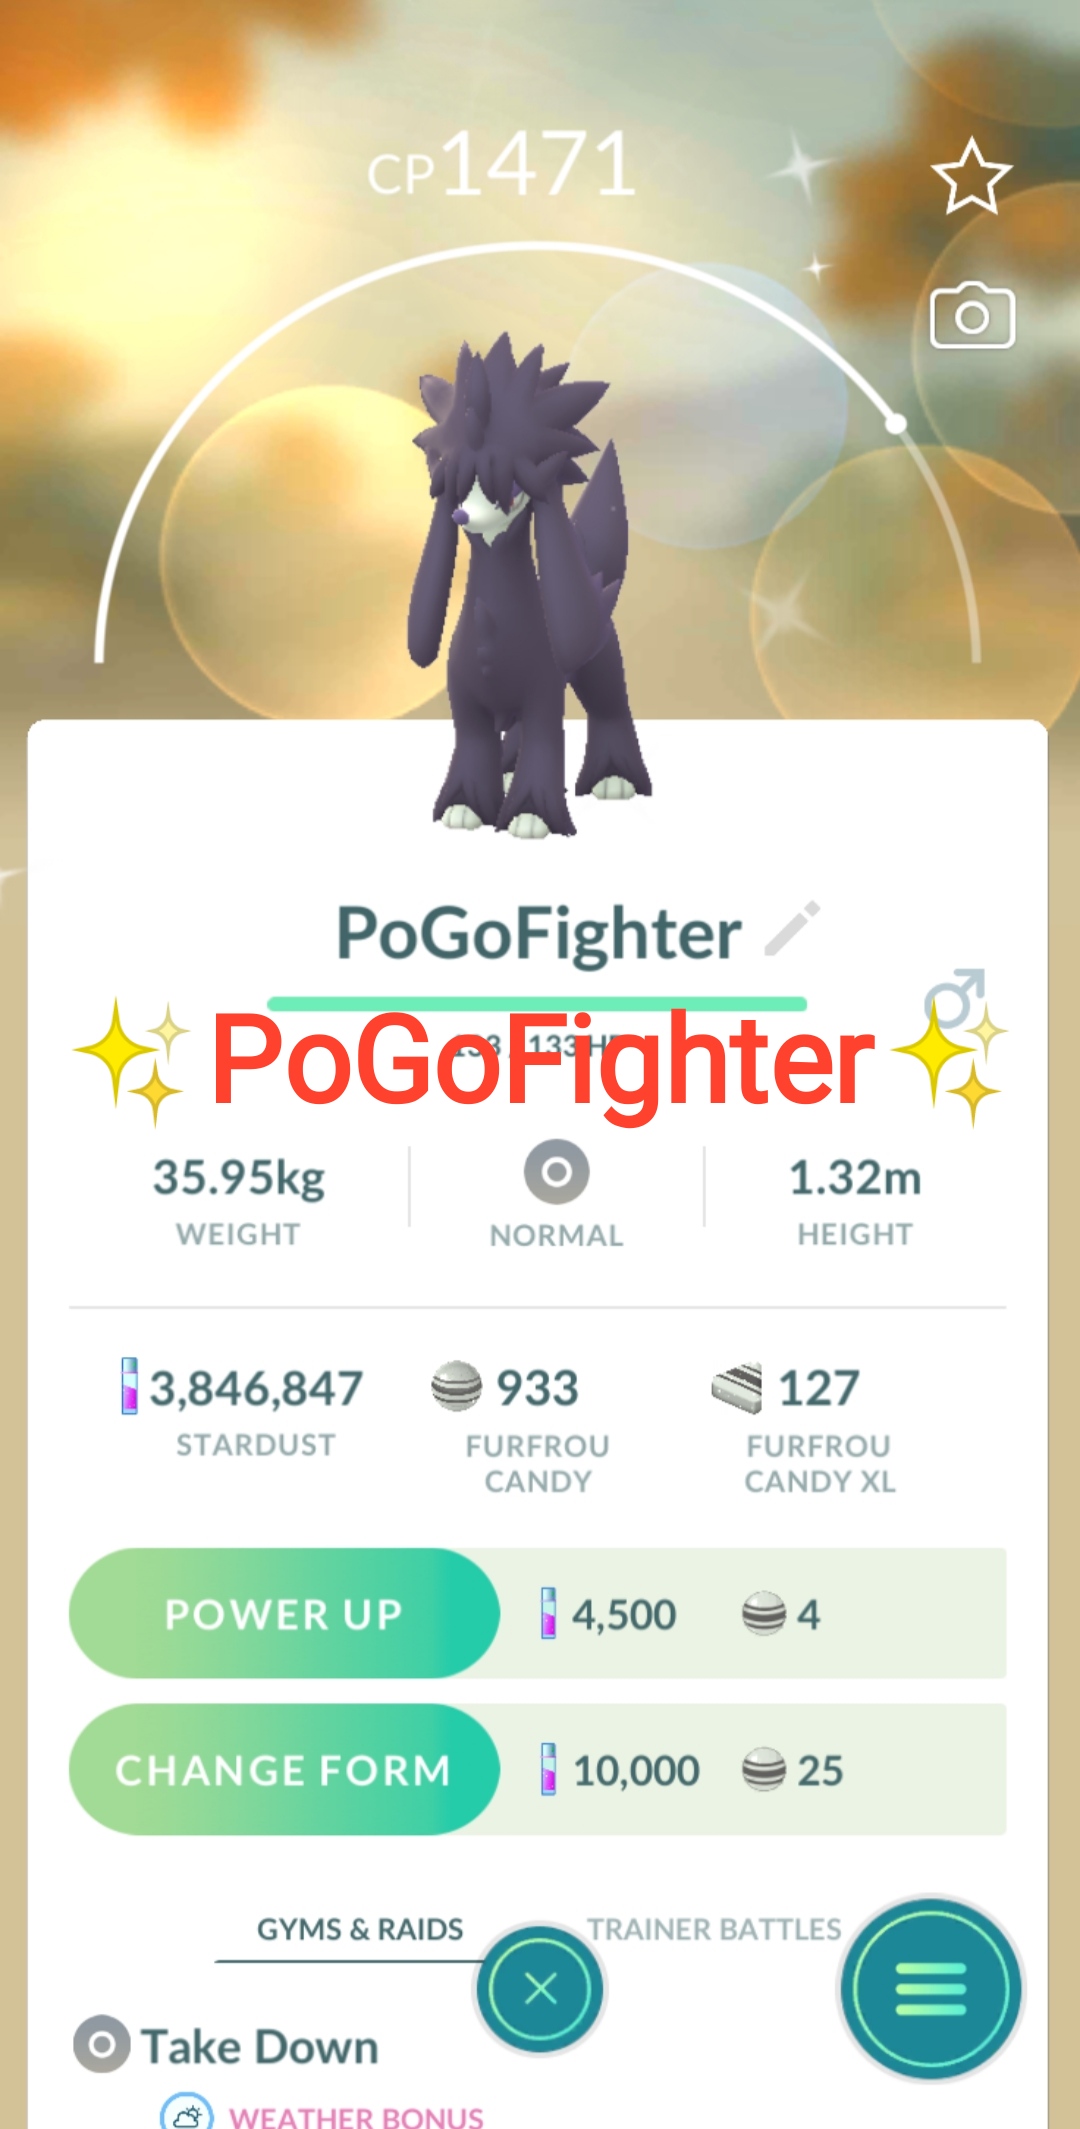 shiny halloween gengar pokemon go from 2020 and instant ￼￼ delivered